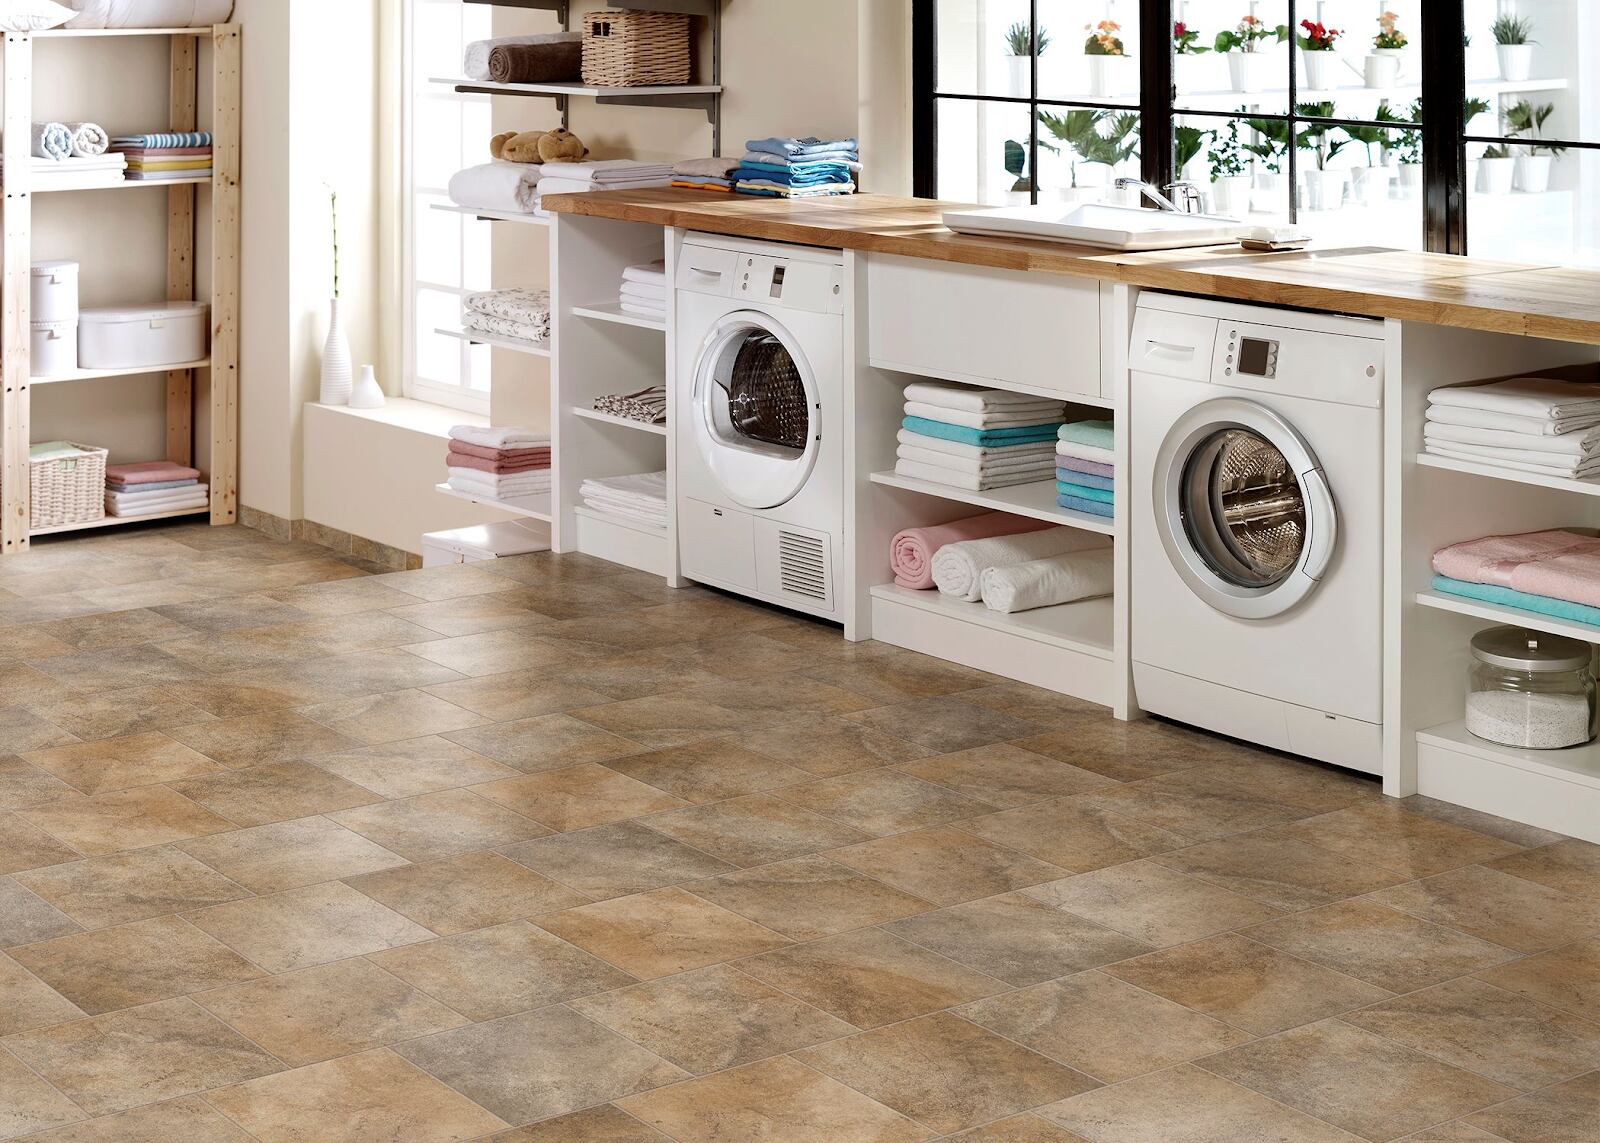 How To Tile Laundry Room Floor | Storables